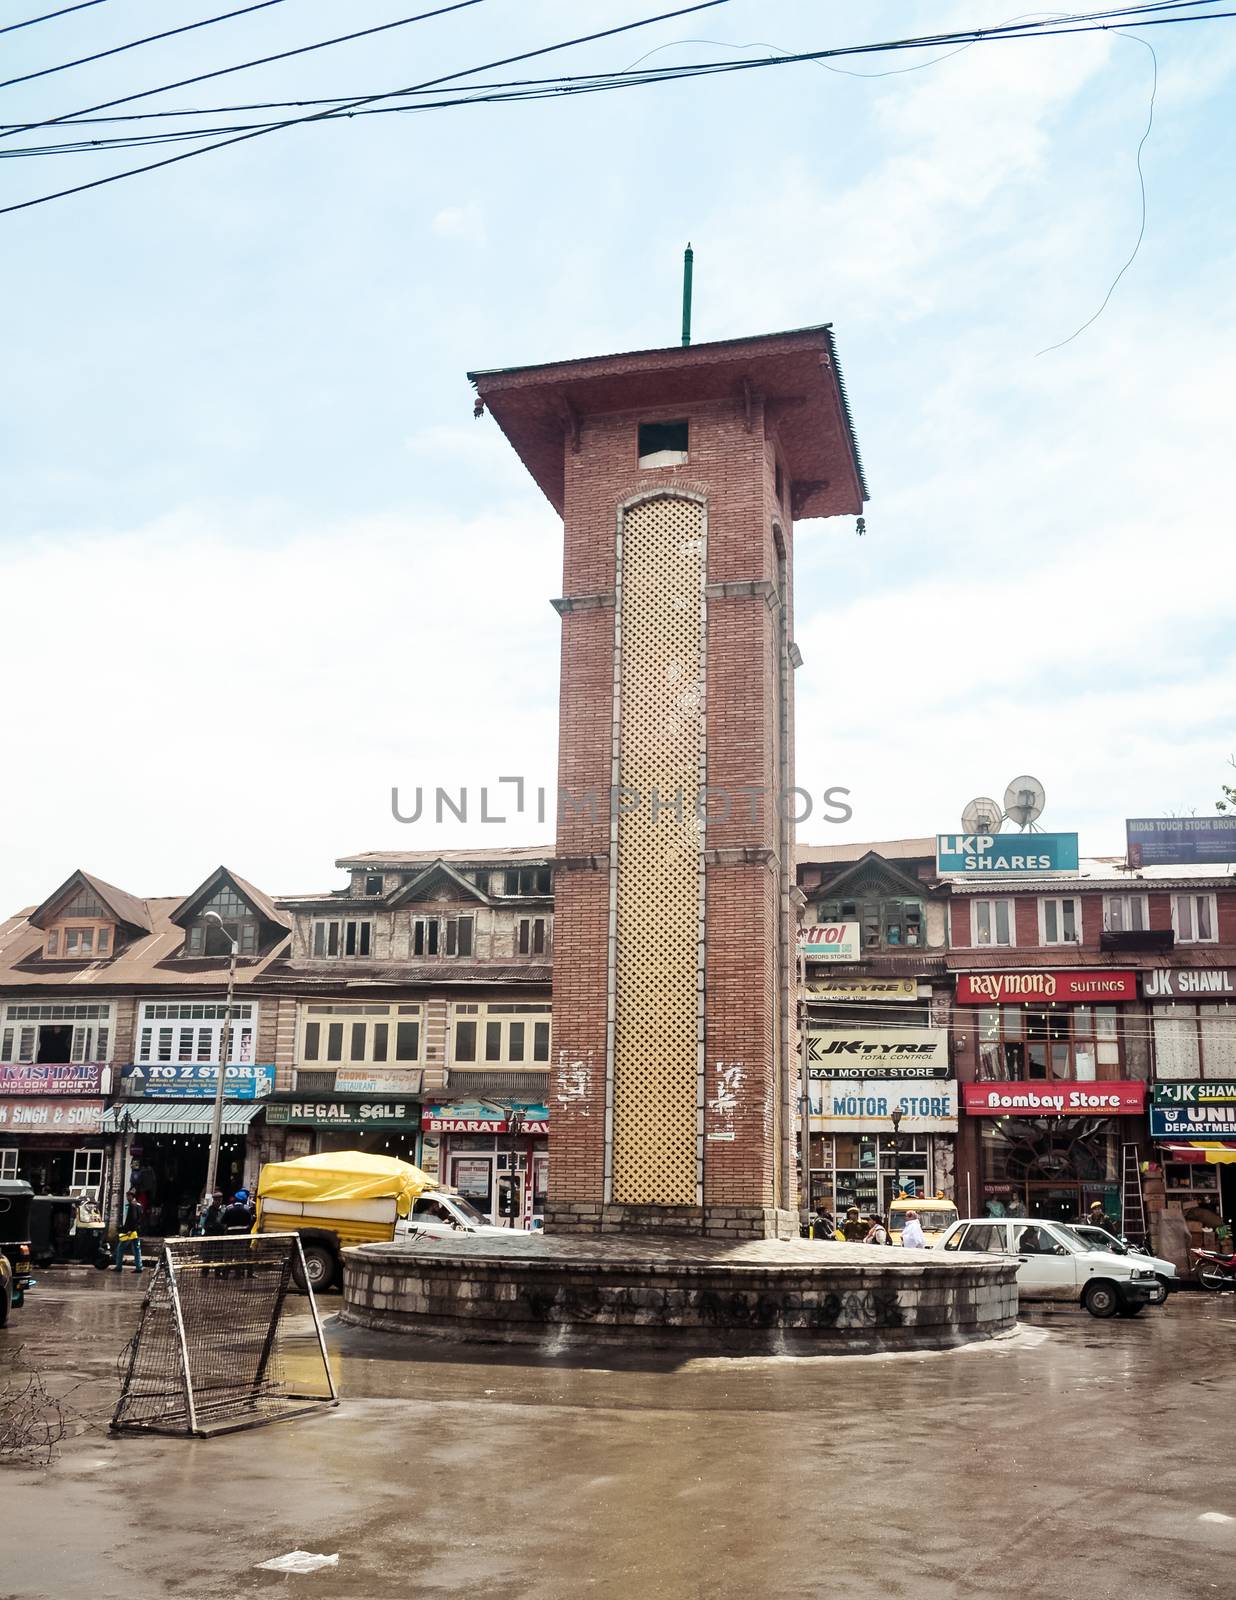 Lal Chowk Clock Tower (Red Square), Srinagar, Jammu - Kashmir, India 14 February 2019 - View of Lal Chowk, famous place for political meetings and most popular commercial shopping center in Srinagar by sudiptabhowmick